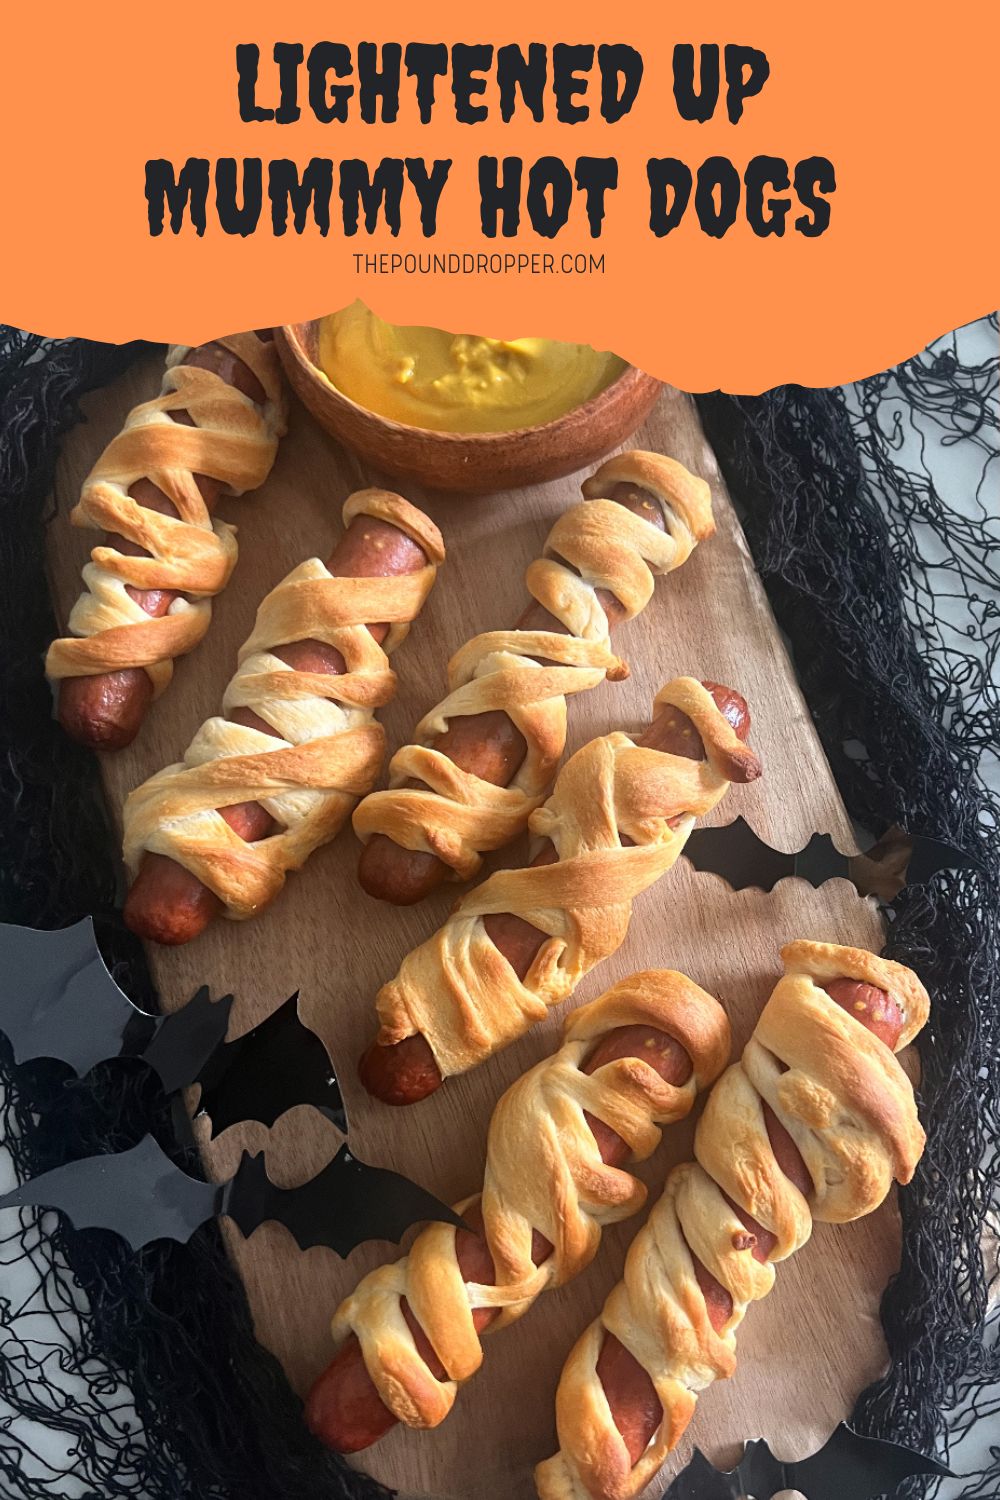 These easy and delicious Lightened Up Mummy Hot Dogs make for the perfect Halloween party snack or appetizer! Ready in just 20 minutes and requires just three ingredients! A fun family friendly, lightened up Halloween recipe that's sure to be a huge hit! via @pounddropper